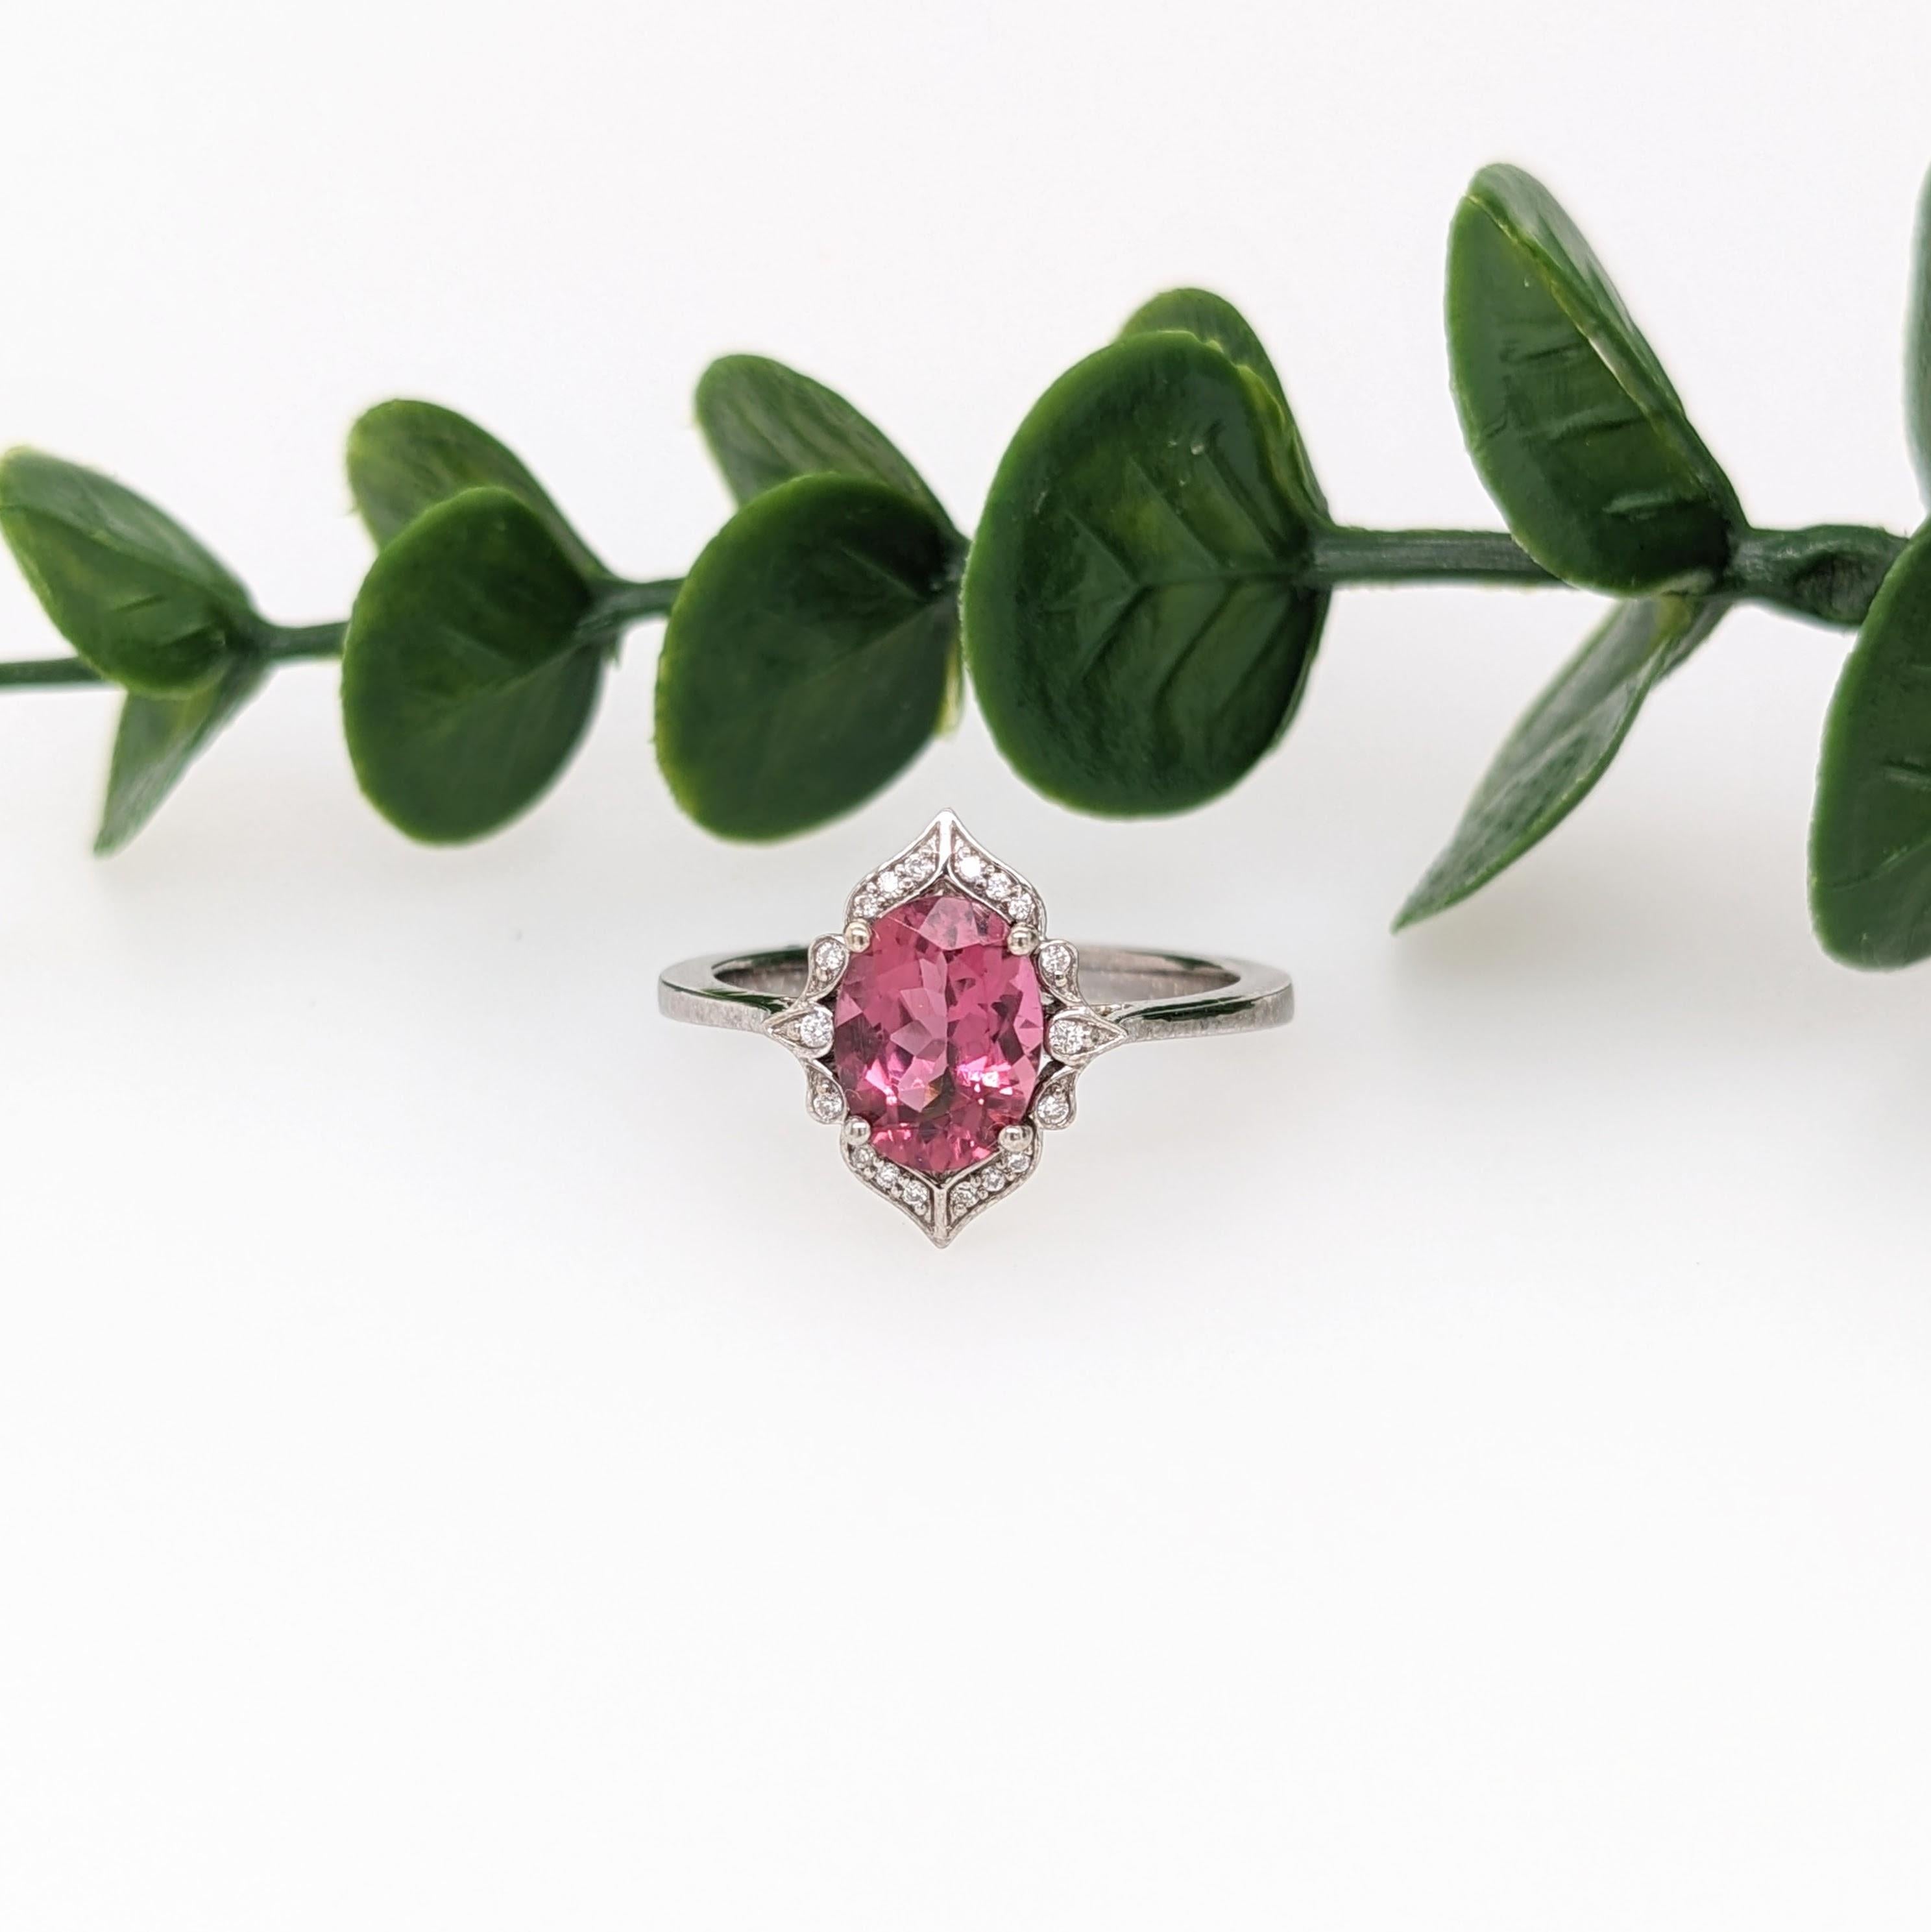 This stunning ring features a beautiful rubellite pink tourmaline framed by a diamond halo in a vintage style design. A beautiful collection piece that is perfect for every occasion. 💕

~~~~~

Specifications:

Item Type: Ring
Stone: Pink